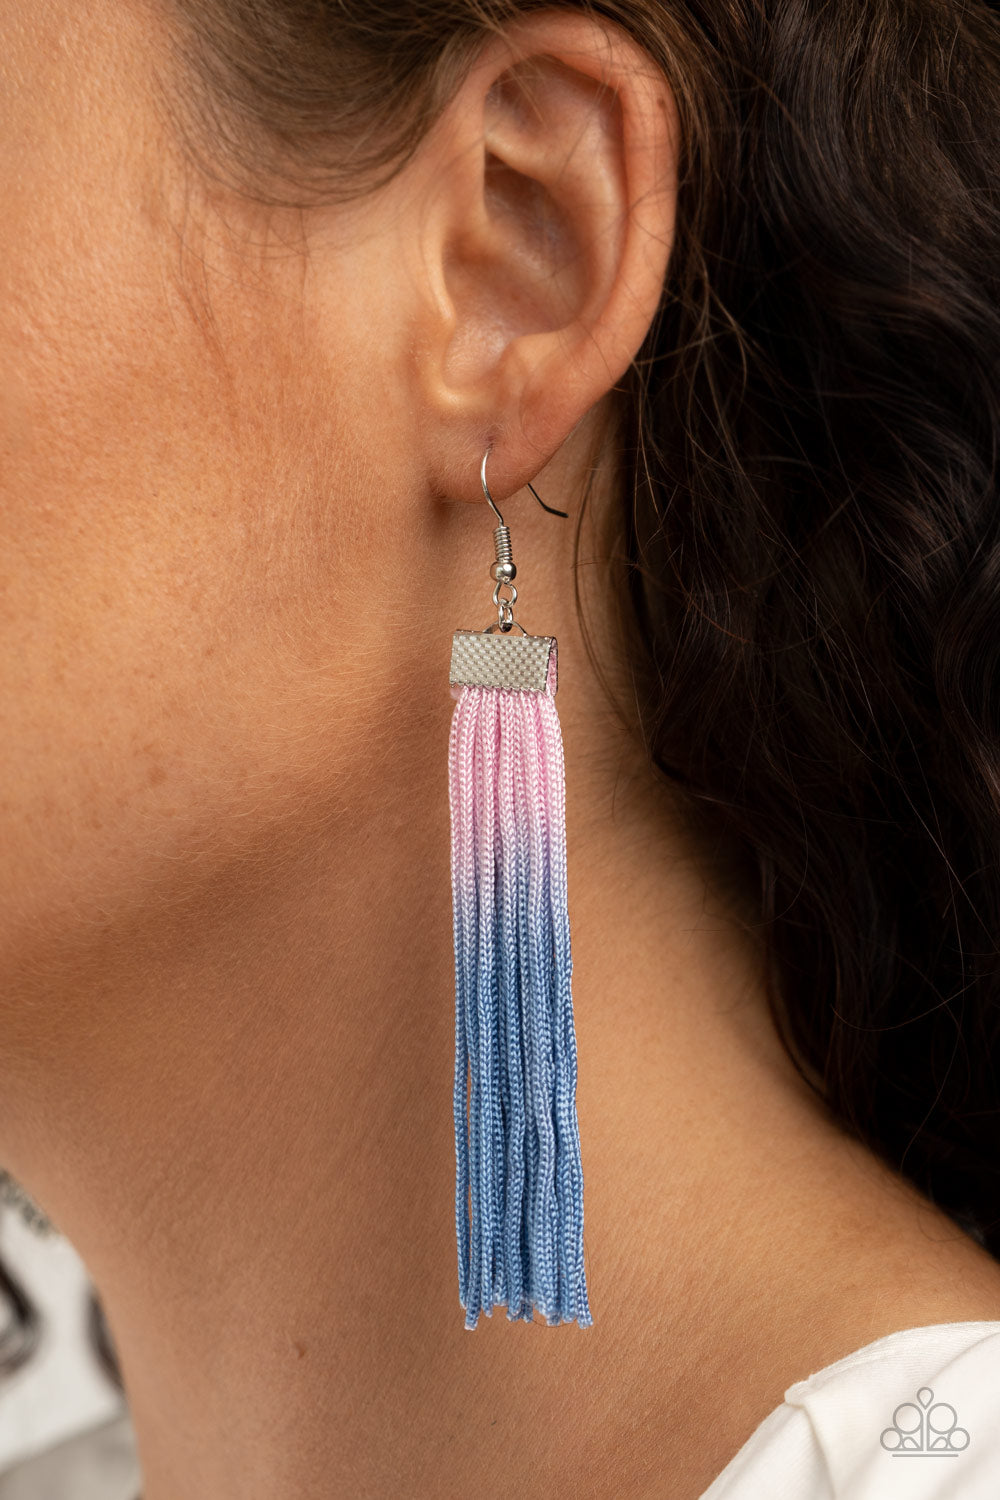 Paparazzi Accessories Dual Immersion - Pink Earrings